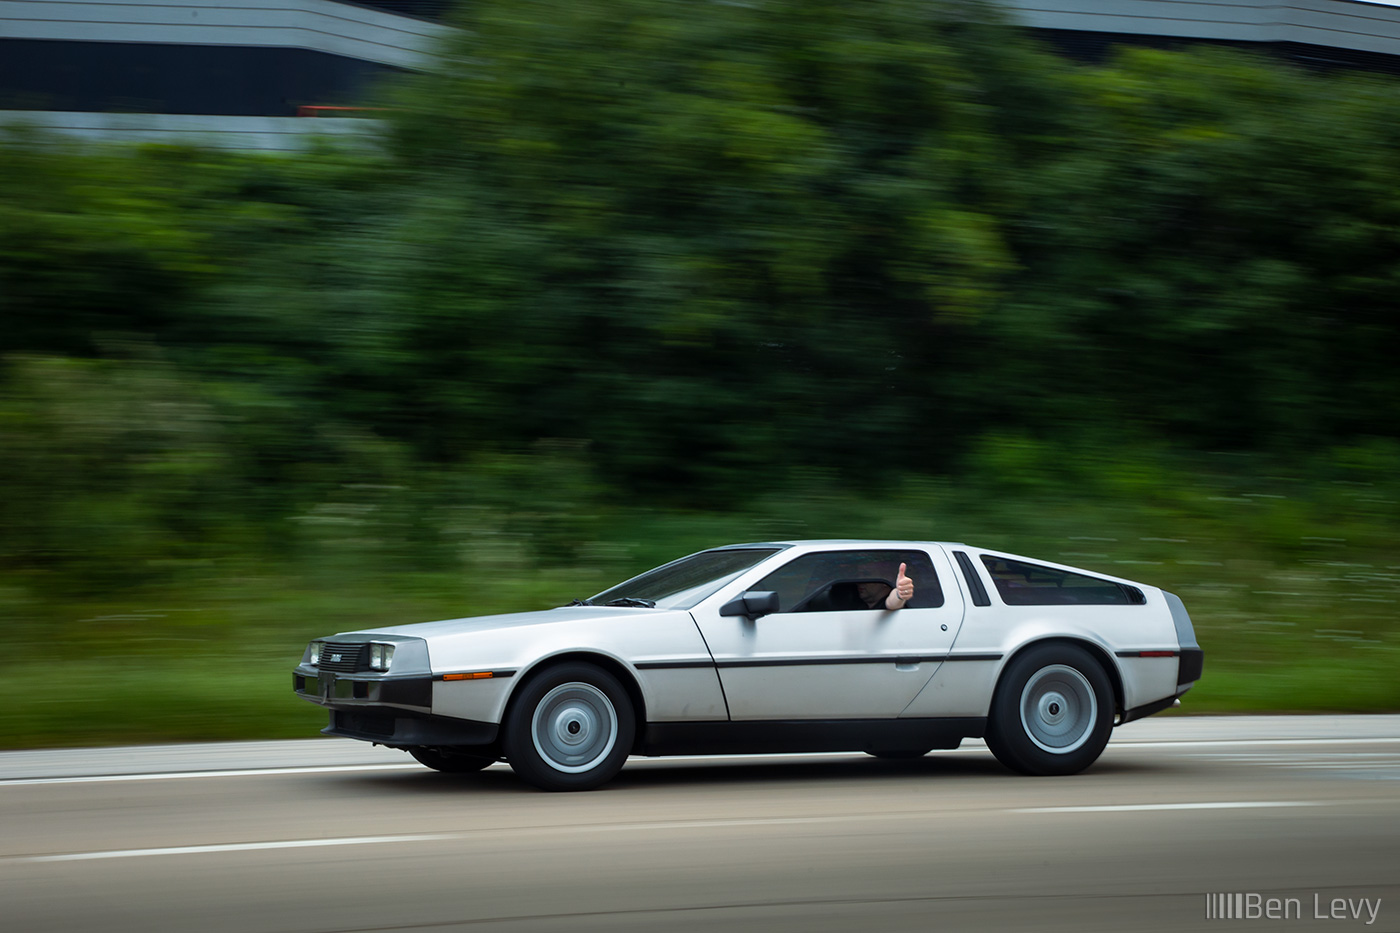 Delorean Driving on the Highway